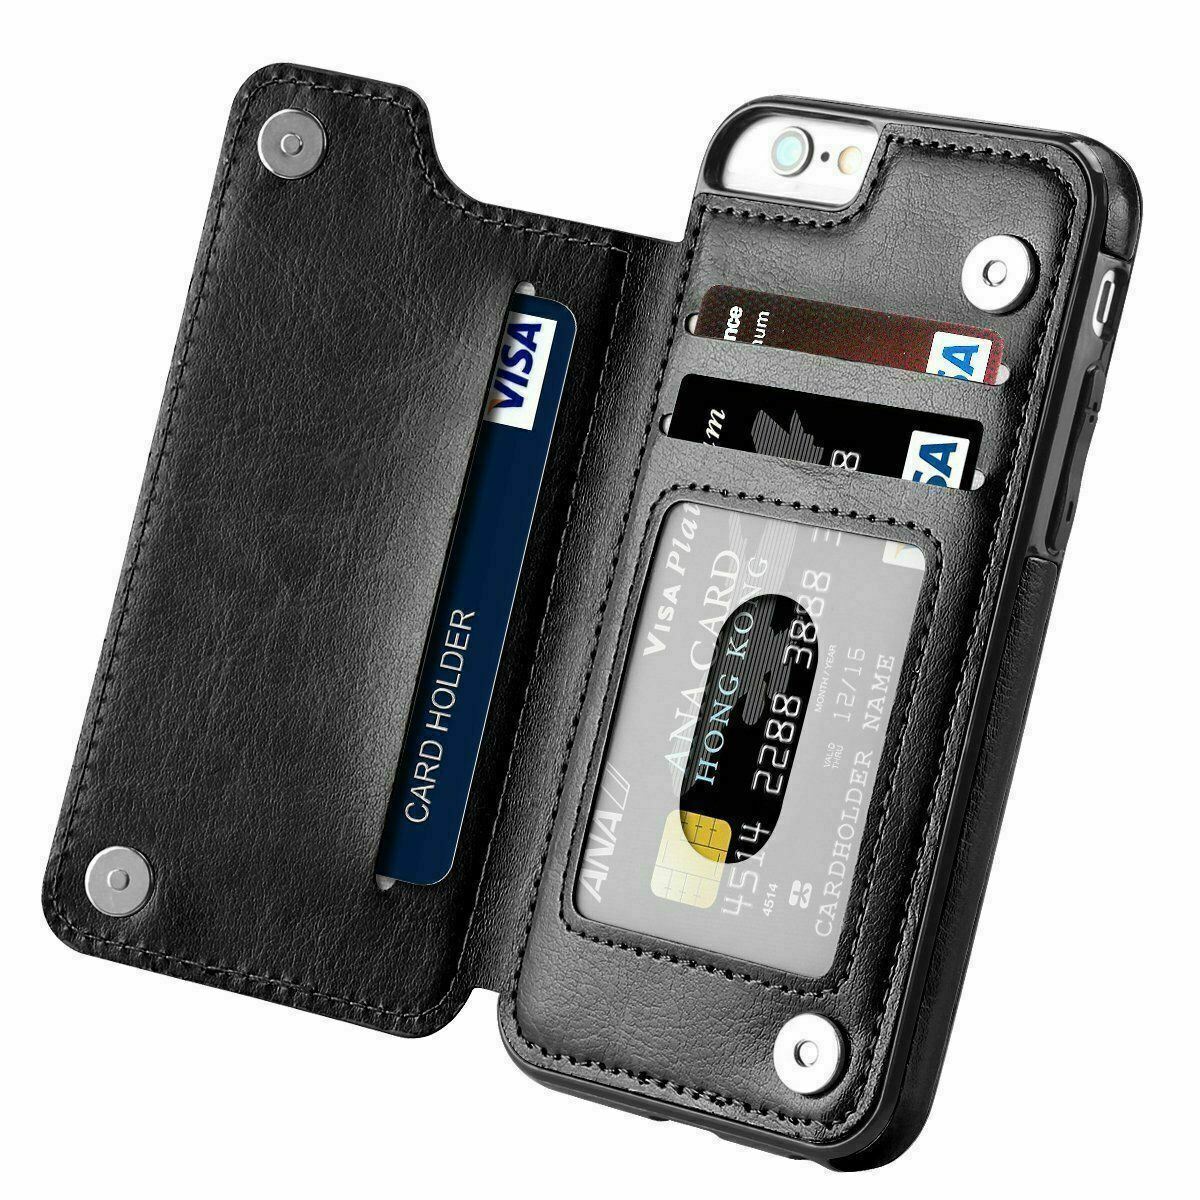 Samsung Flip Leather Wallet Phone Case Cover